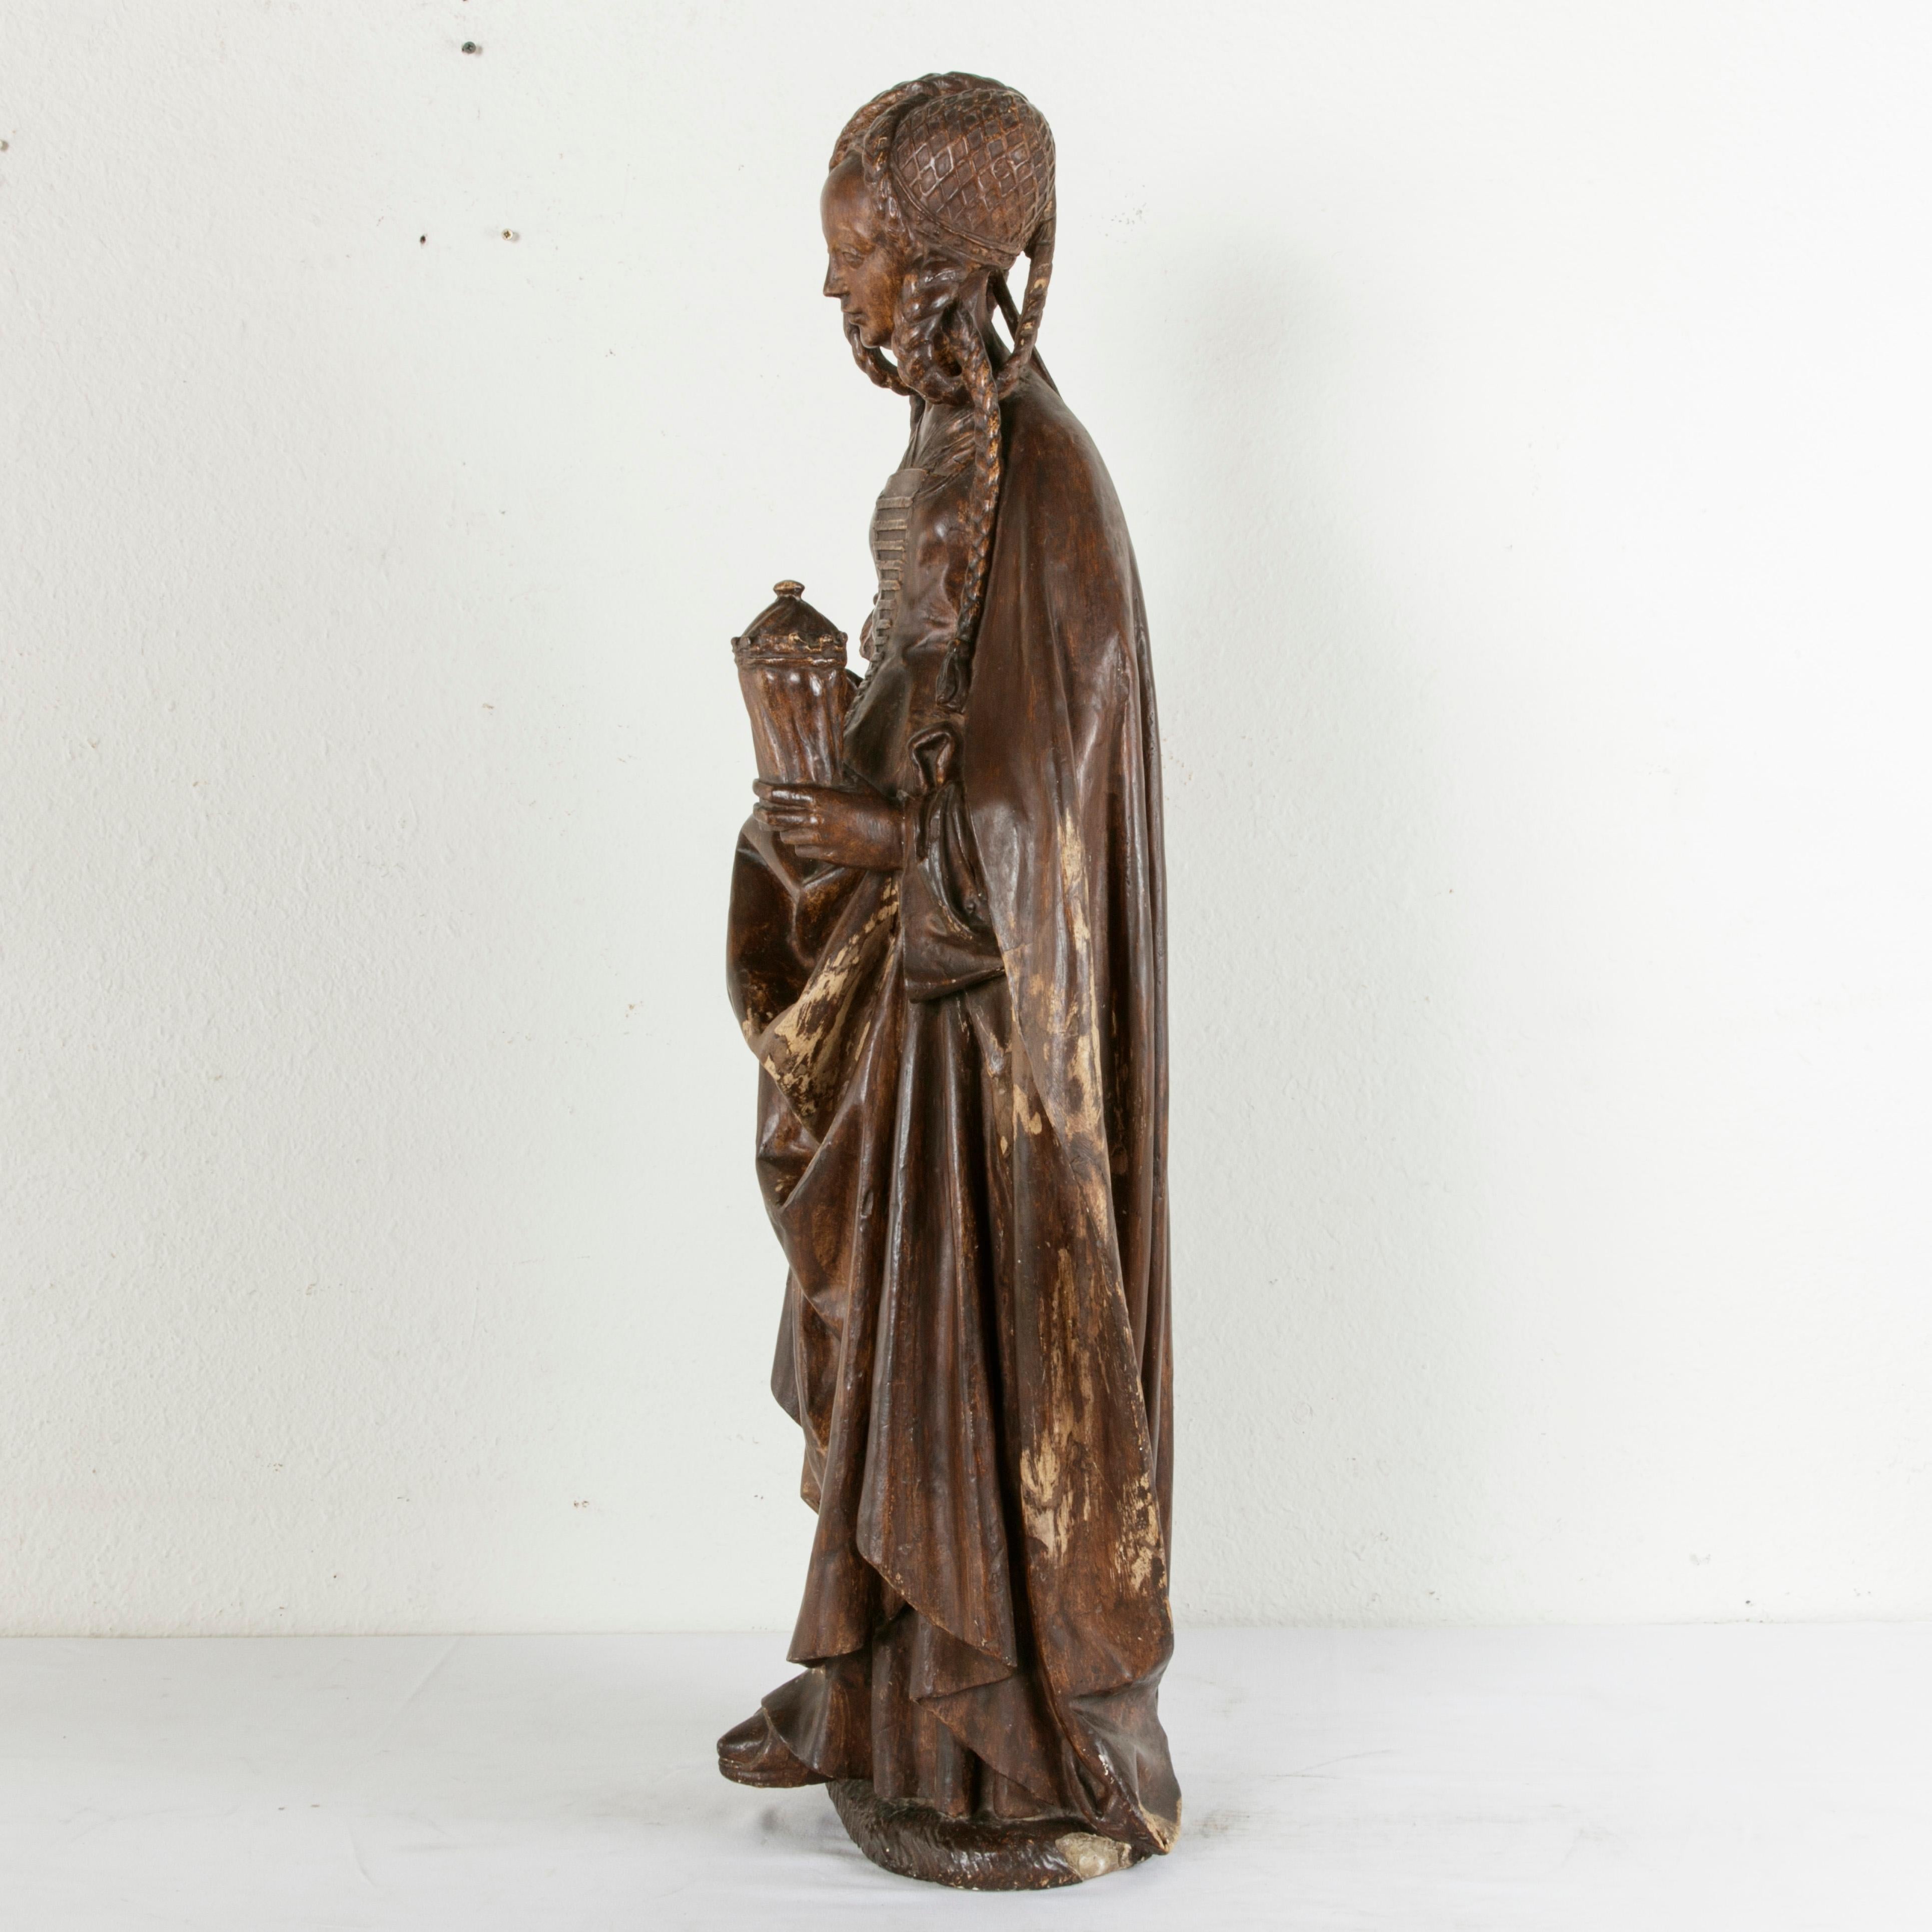 Patinated French Plaster on Wood Sculpture of Mary Magdalene in Renaissance Dress